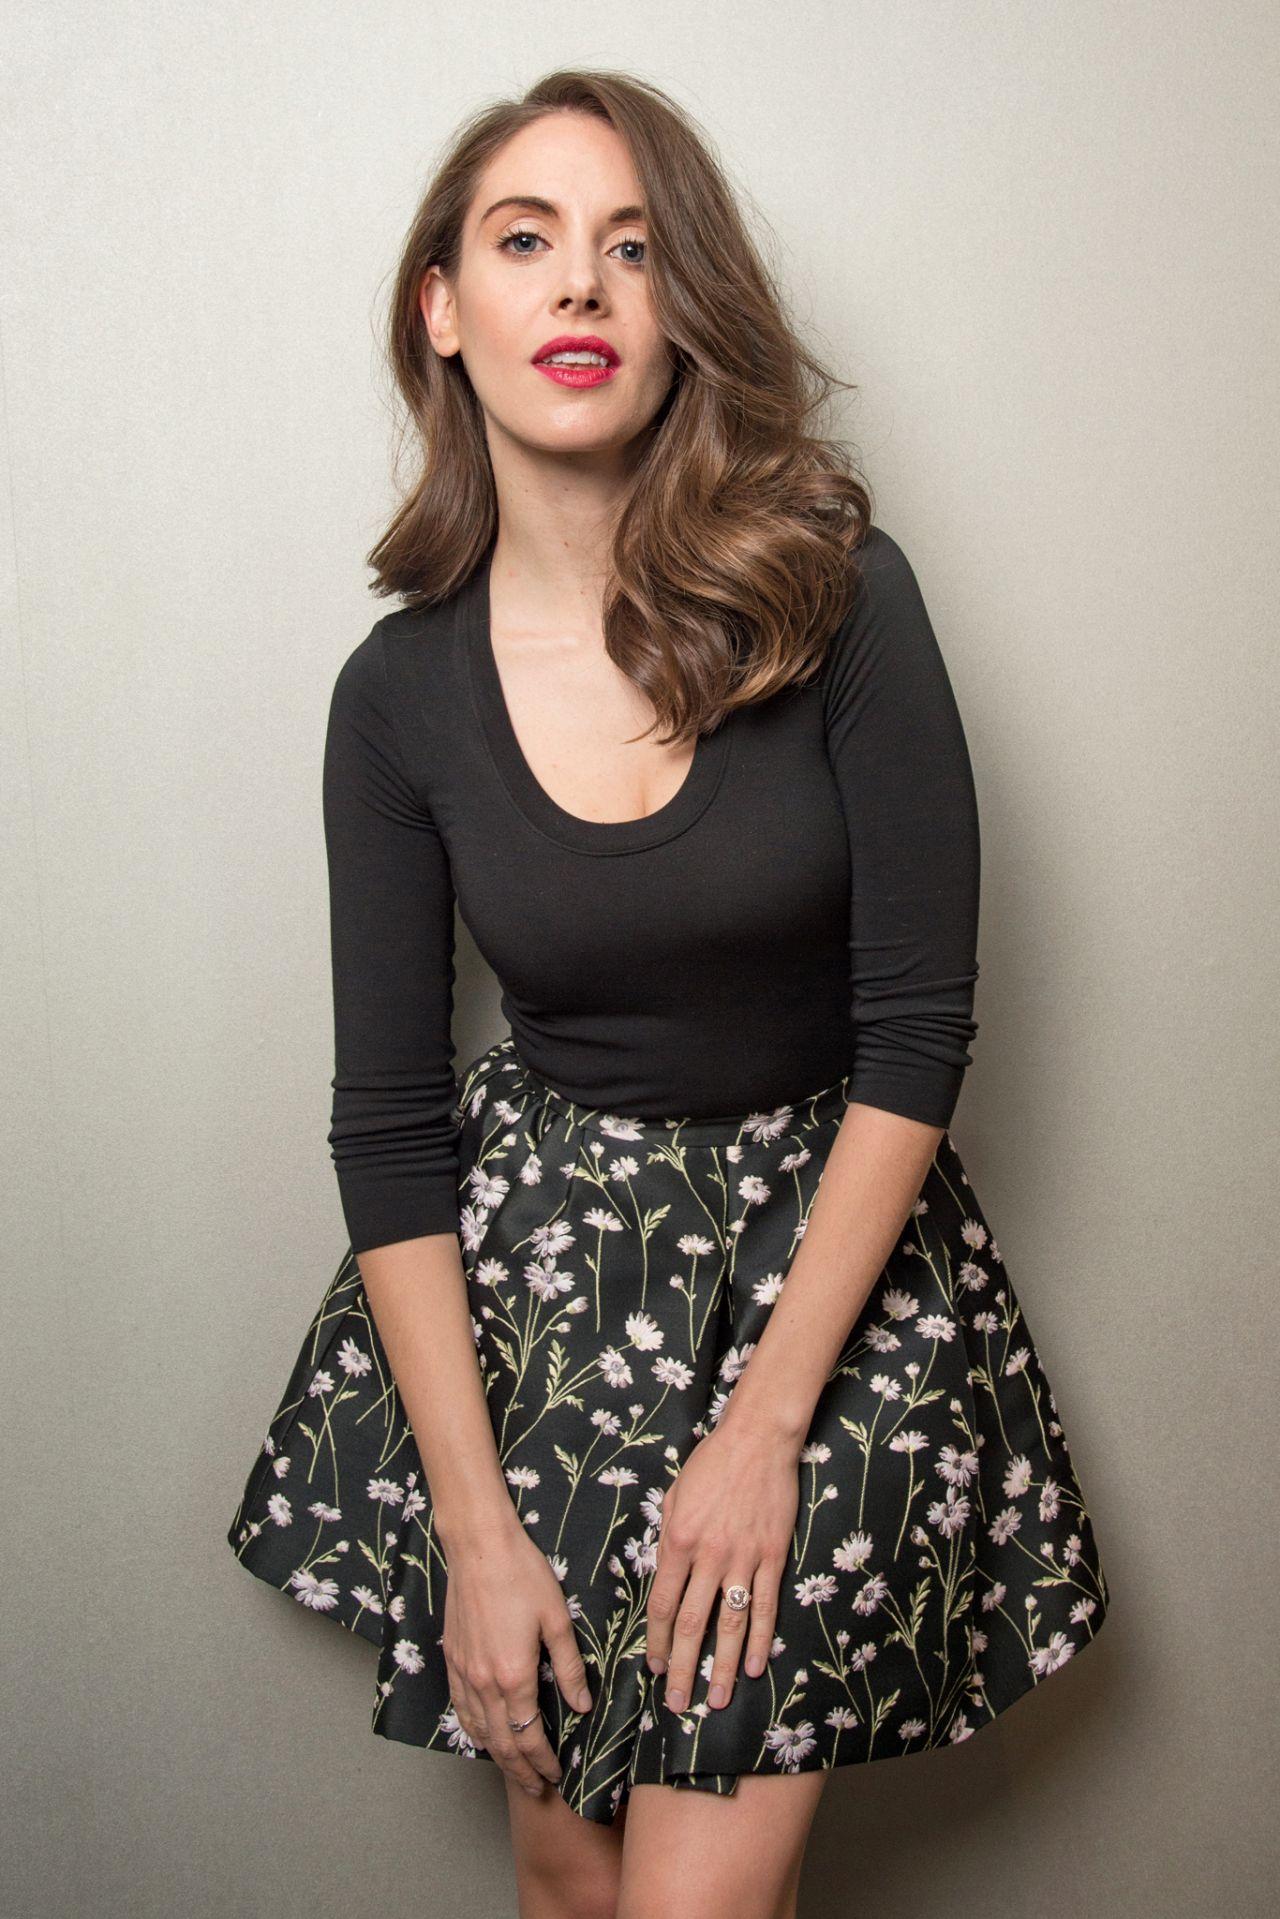 75+ Hot Pictures Of Alison Brie – The Glow TV Series Actress | Best Of Comic Books